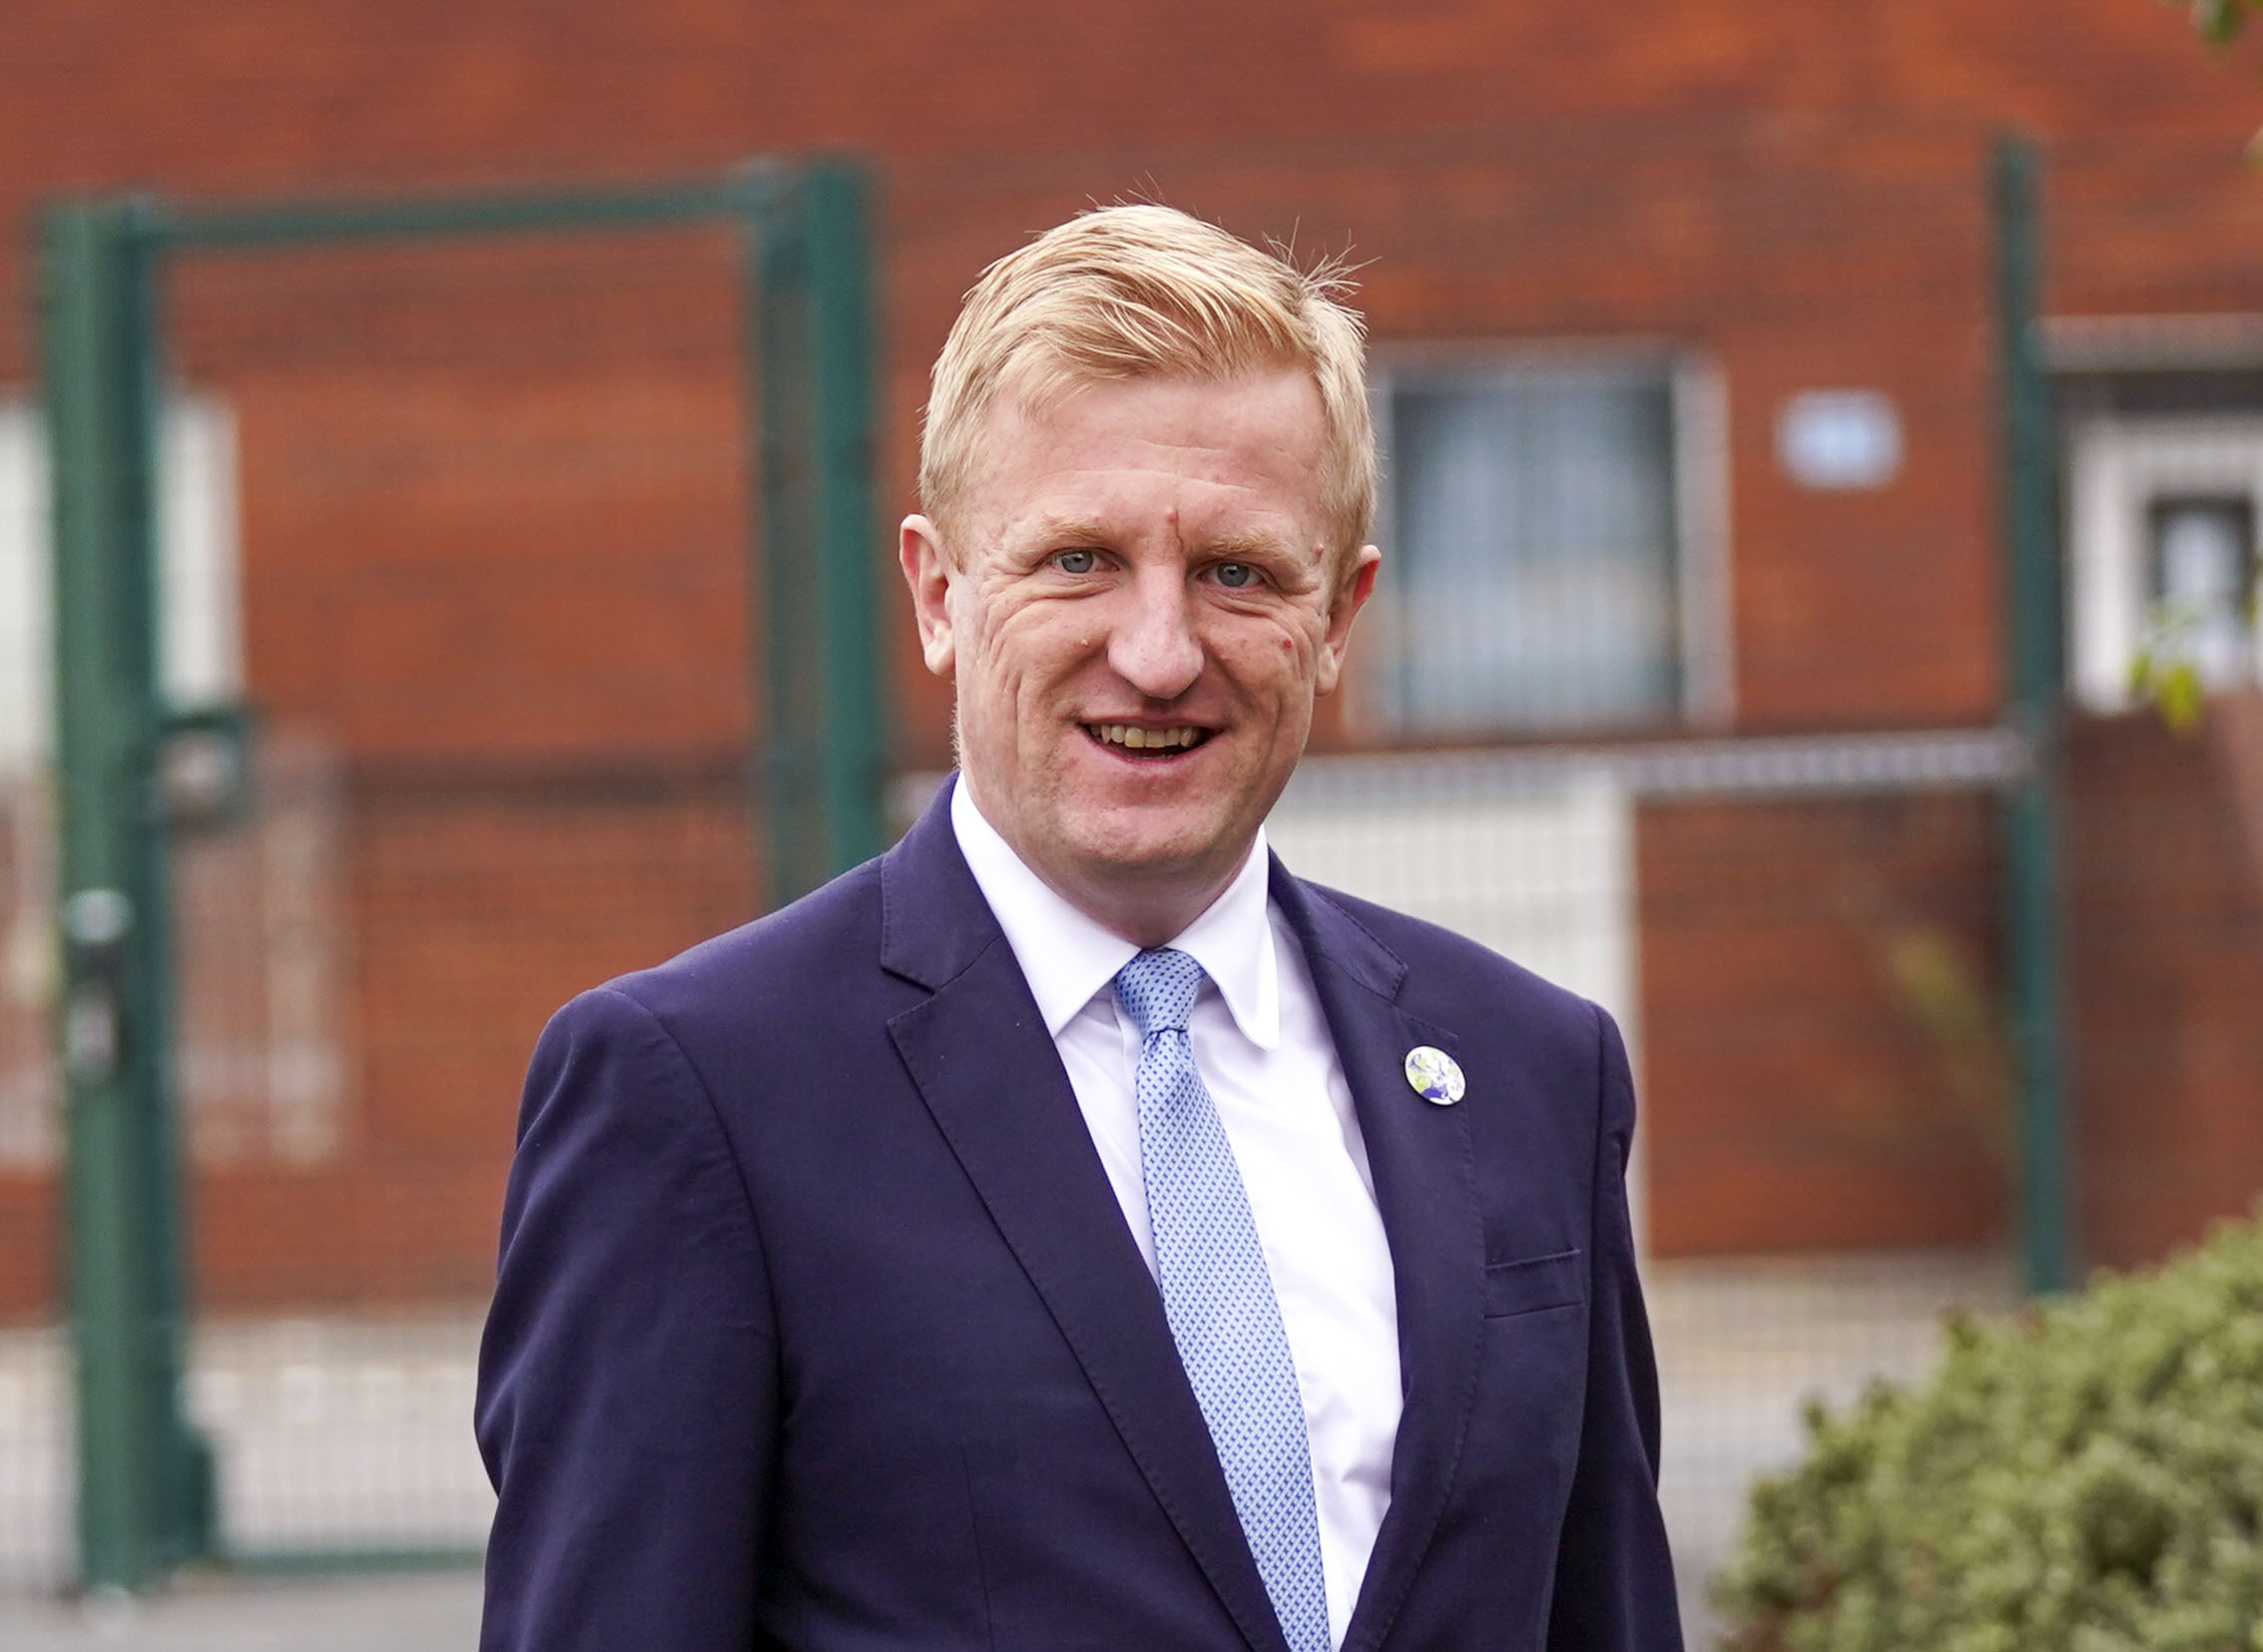 The question was directed to Hertsmere MP Oliver Dowden (Photo: PA)